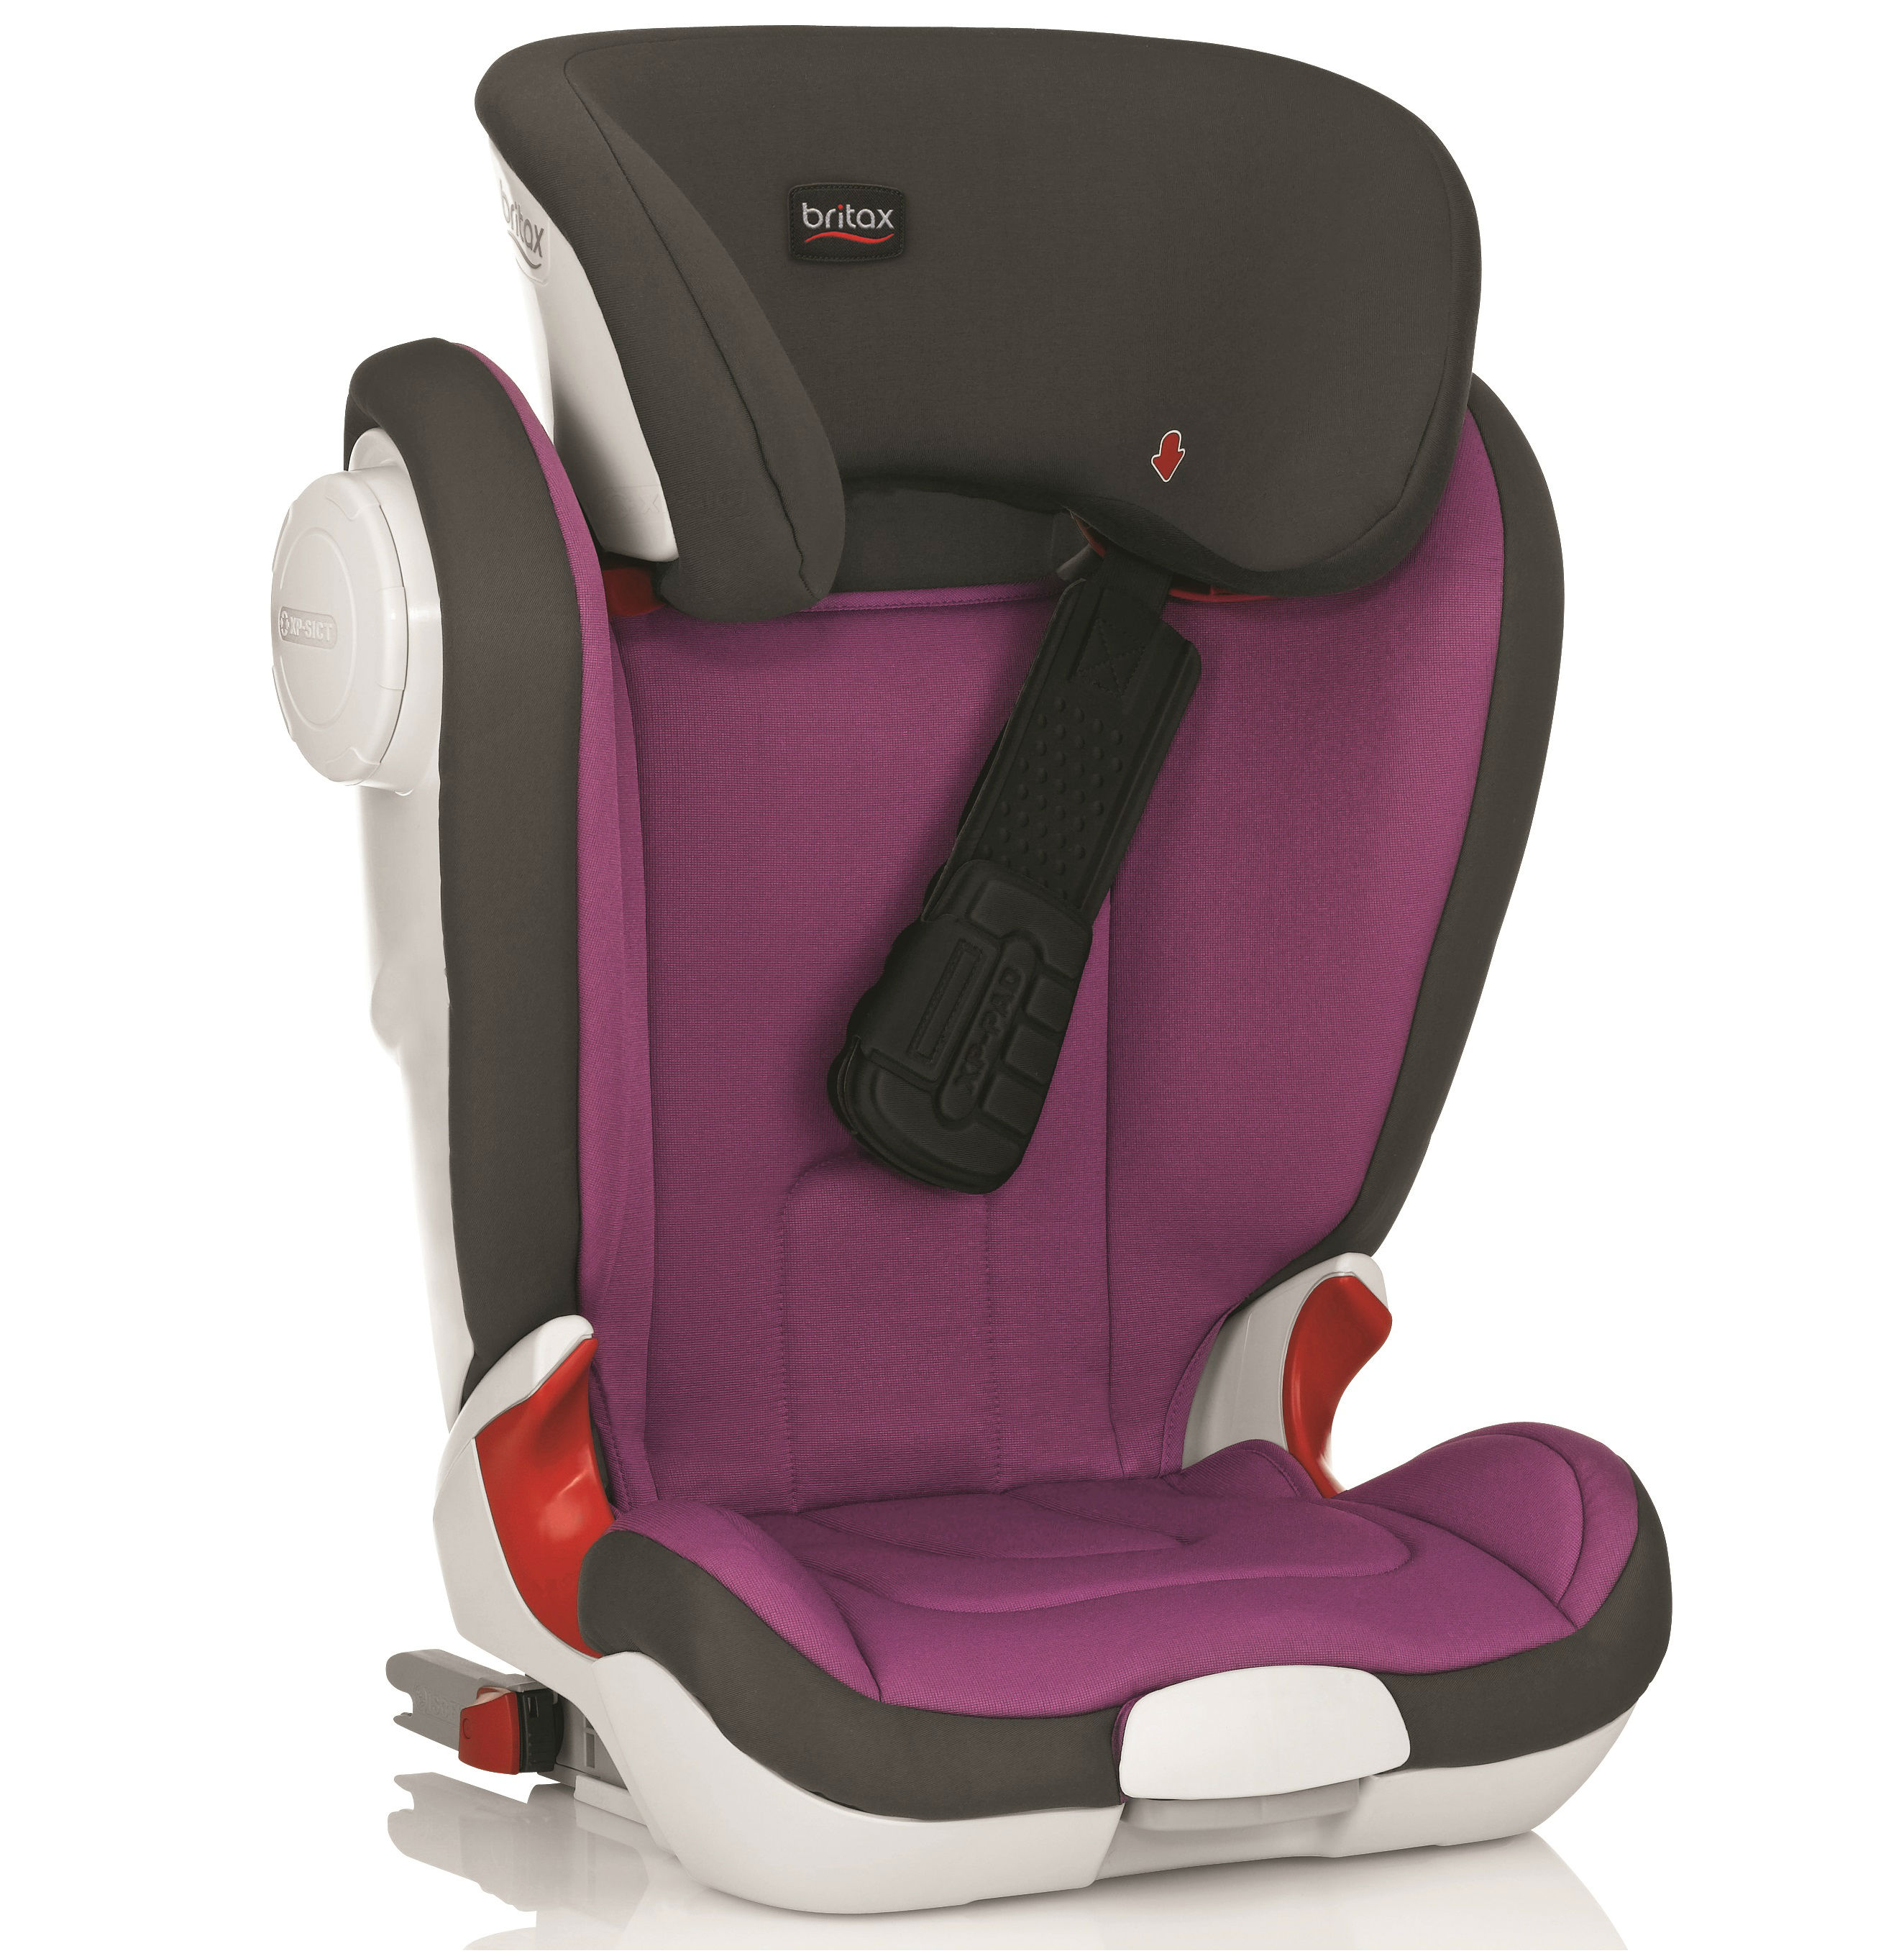 Britax claims that high-back booster child car seats are safer than basic cushion-type boosters